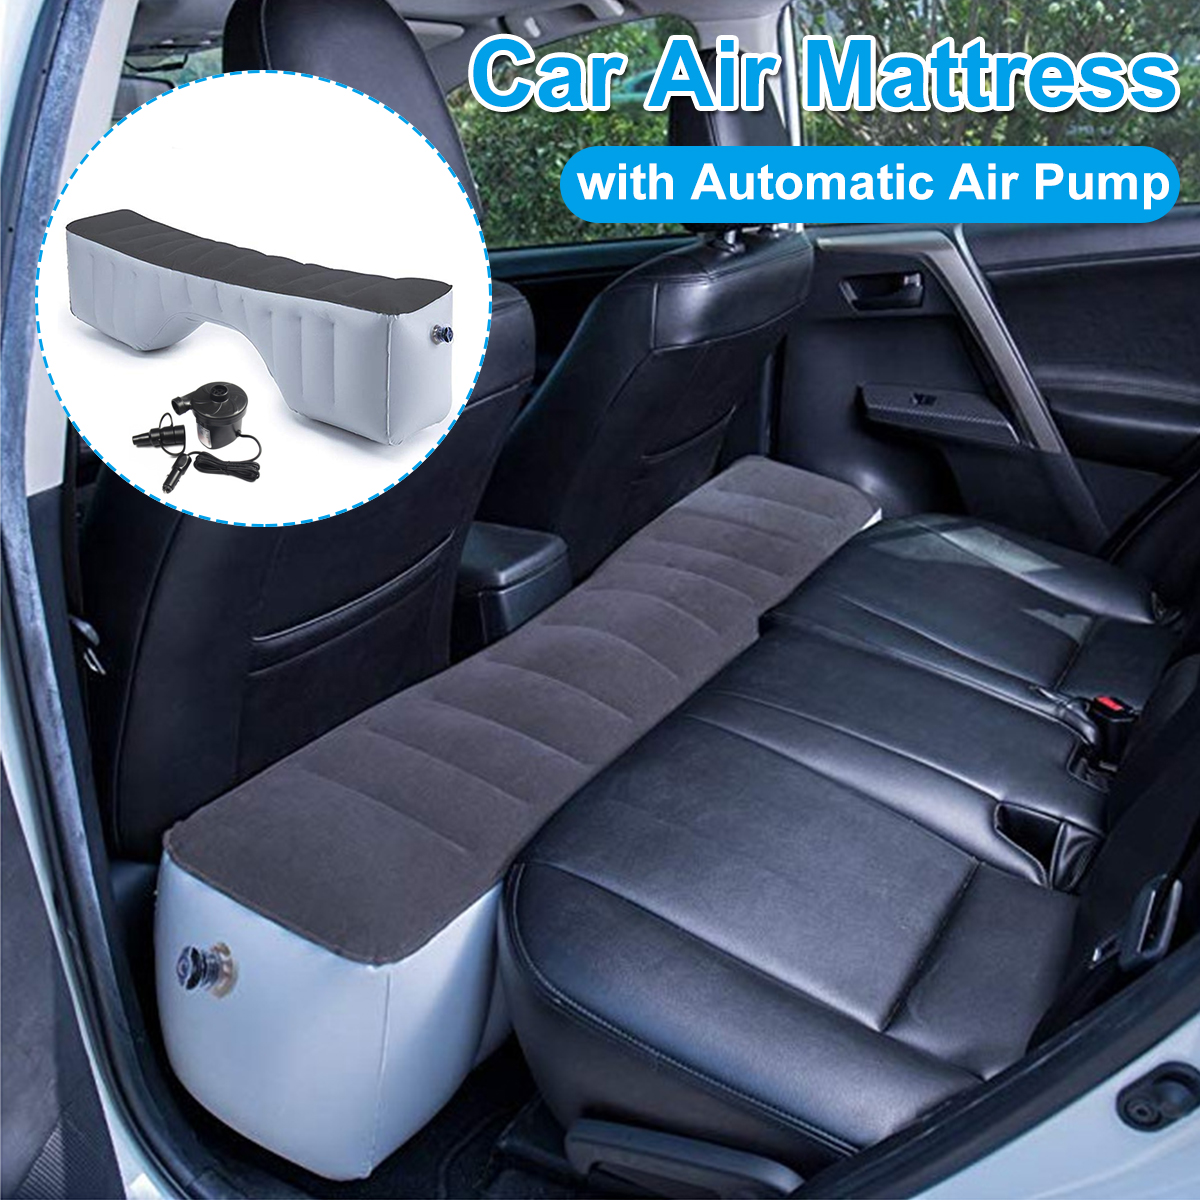 512x106x146in-Car-Air-Inflatable-Mattress-Sleeping-Bed-Seat-Cushion-Pad-Outdoor-Travel-1780313-1